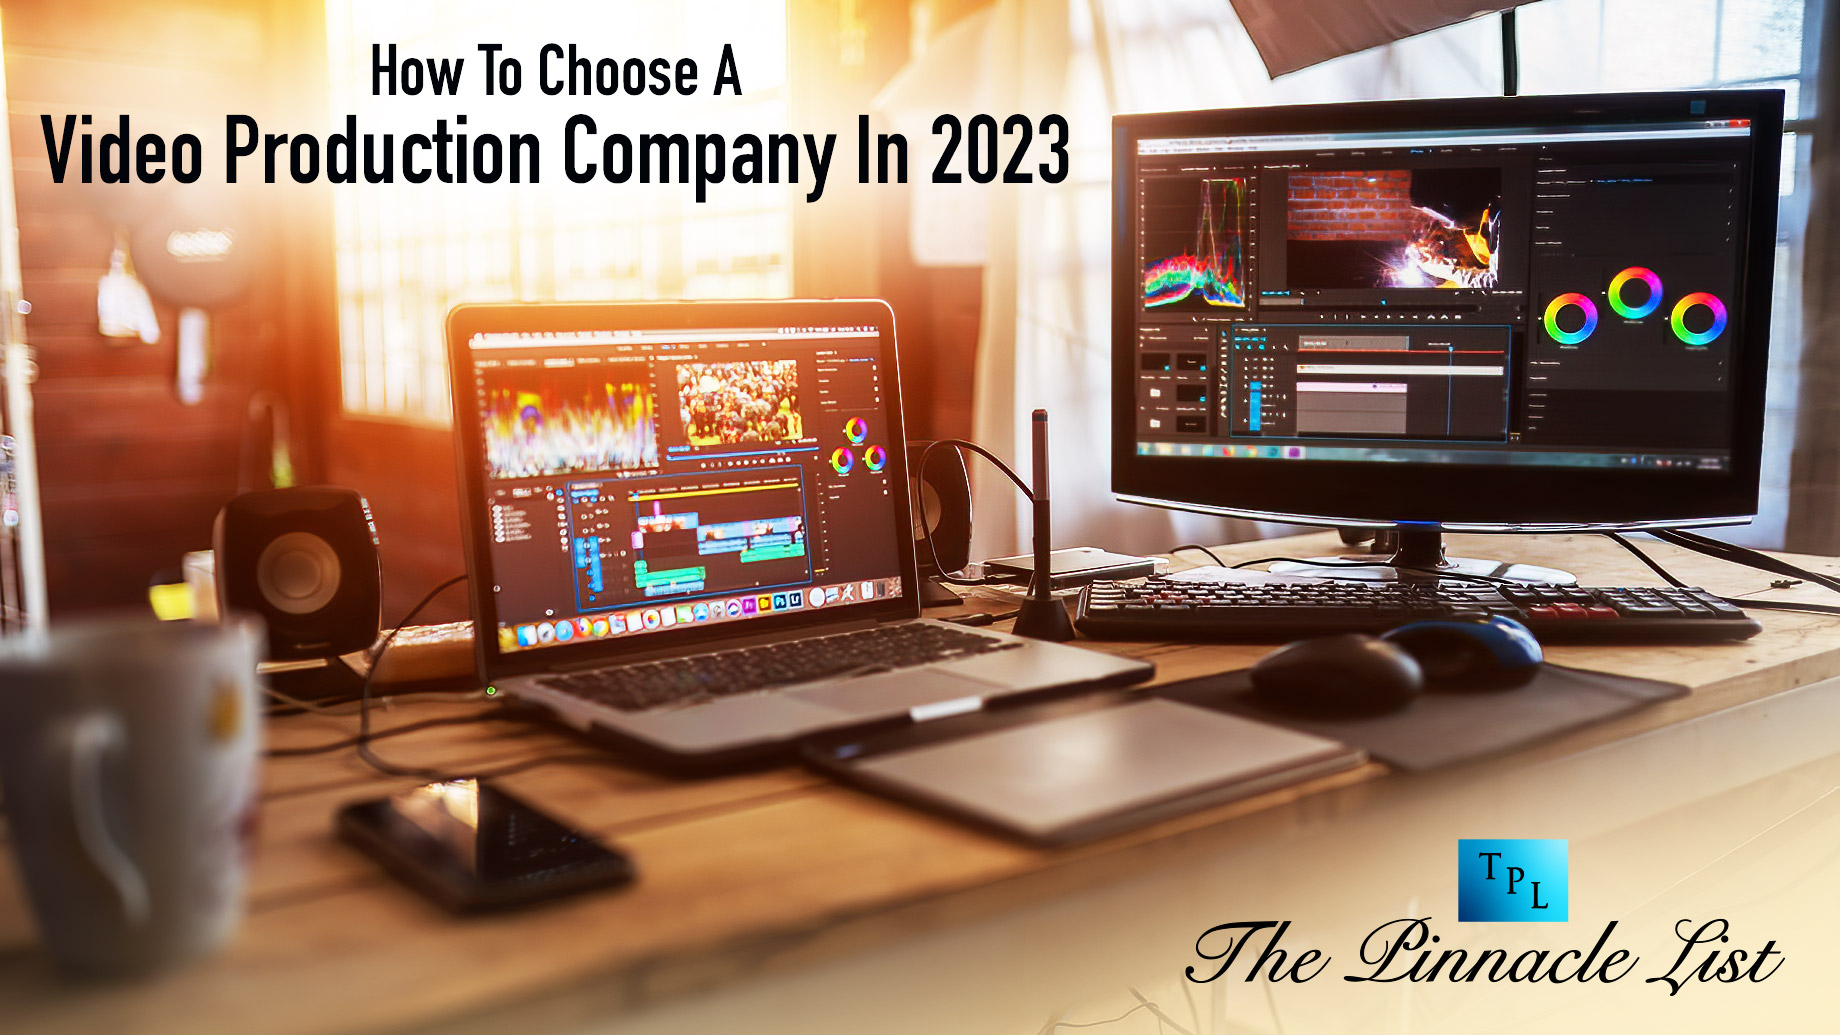 How To Choose A Video Production Company In 2023